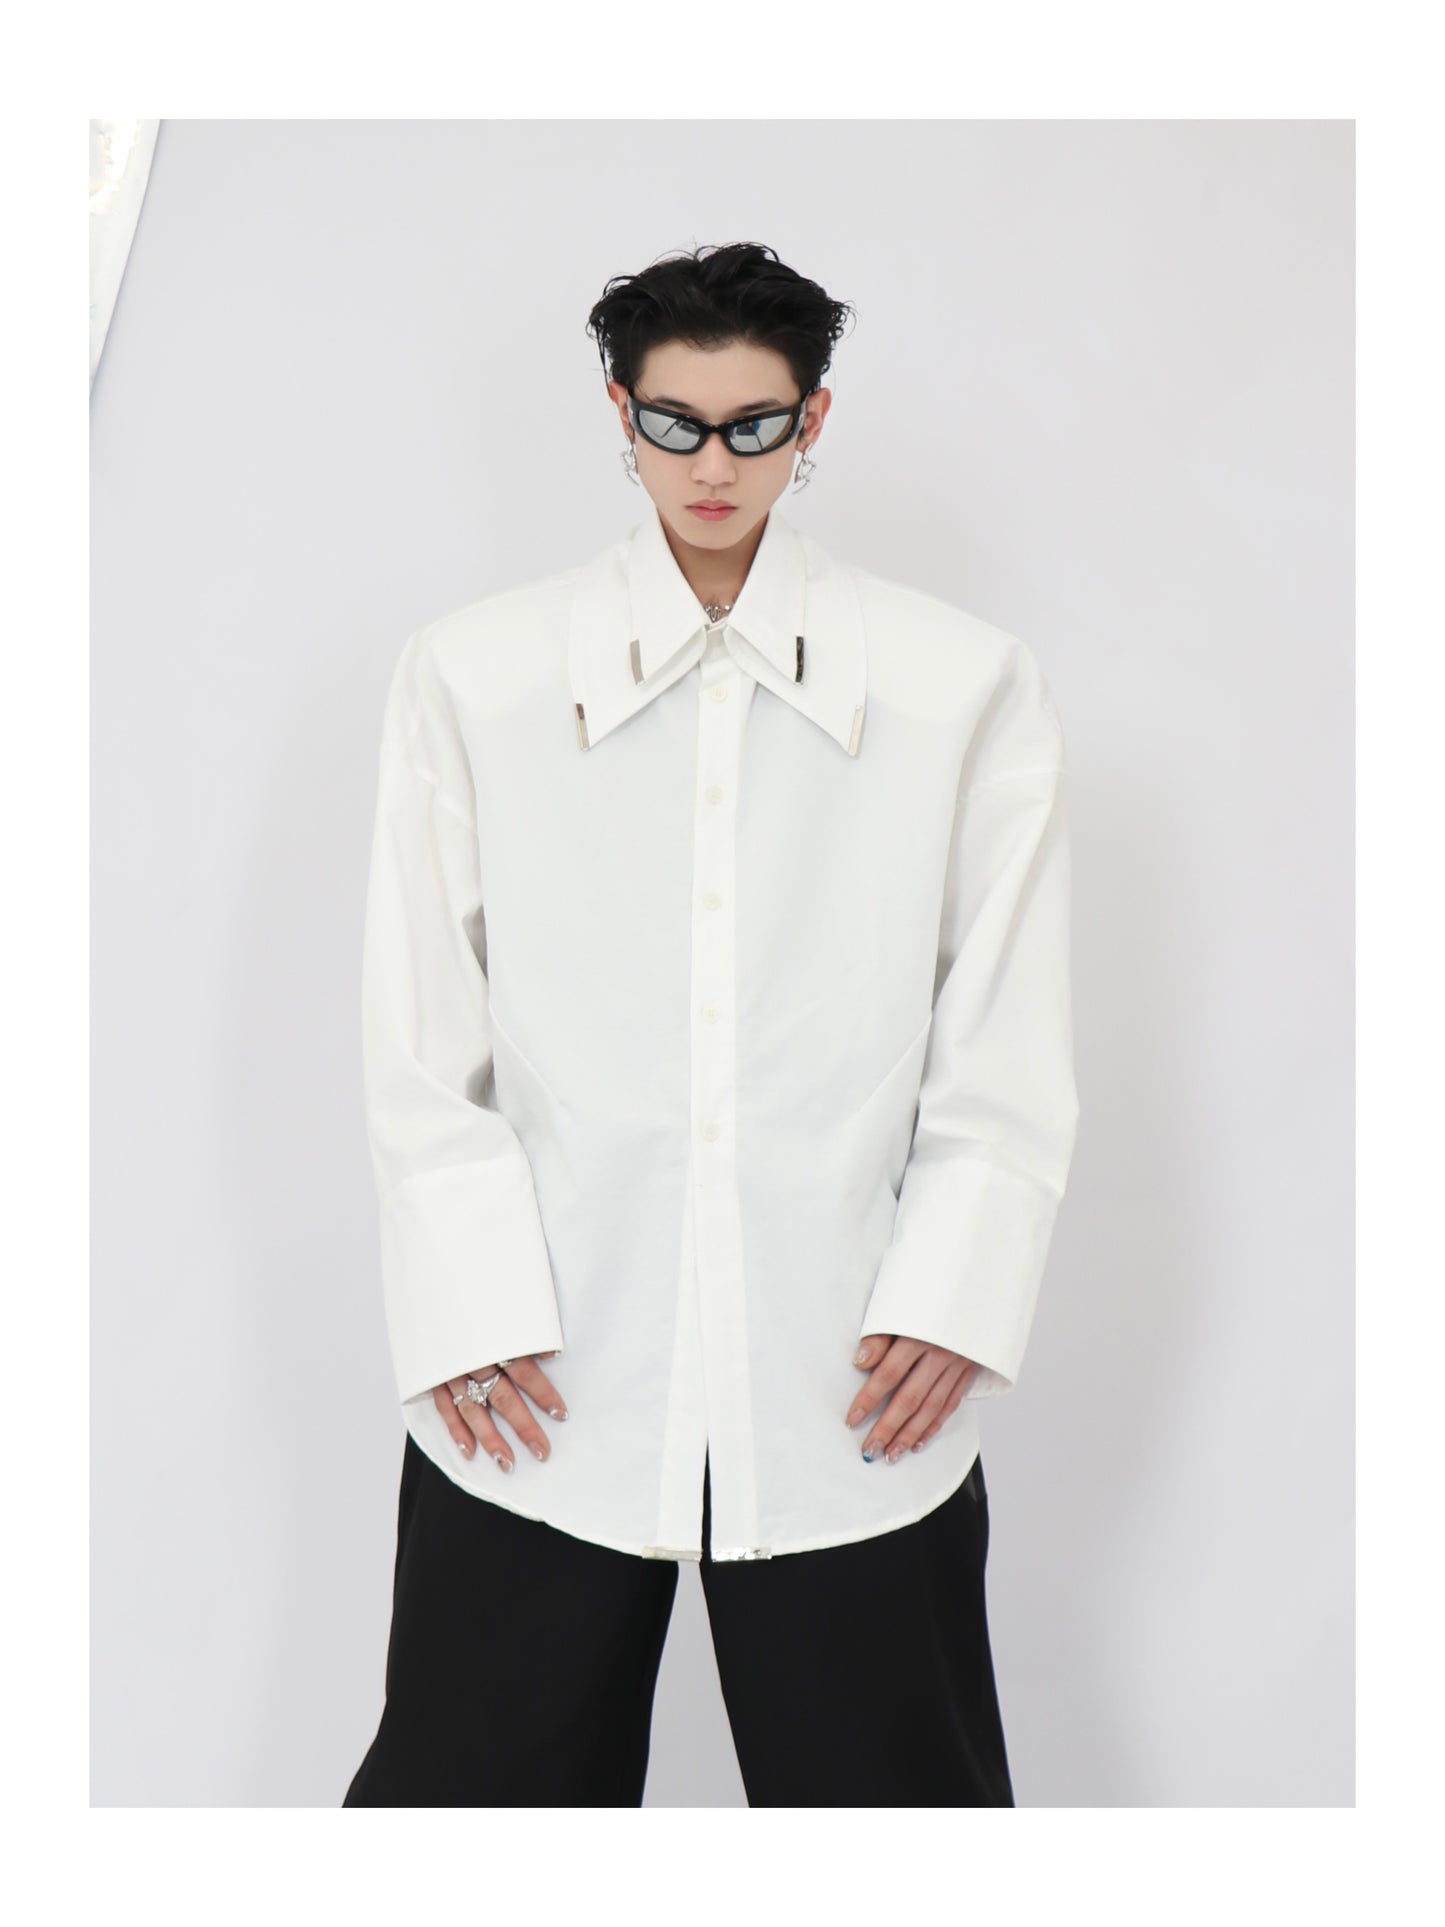 UNISEX Double Layered Collar Deconstructed Shirt | ARGUE CULTURE Collection [H155]